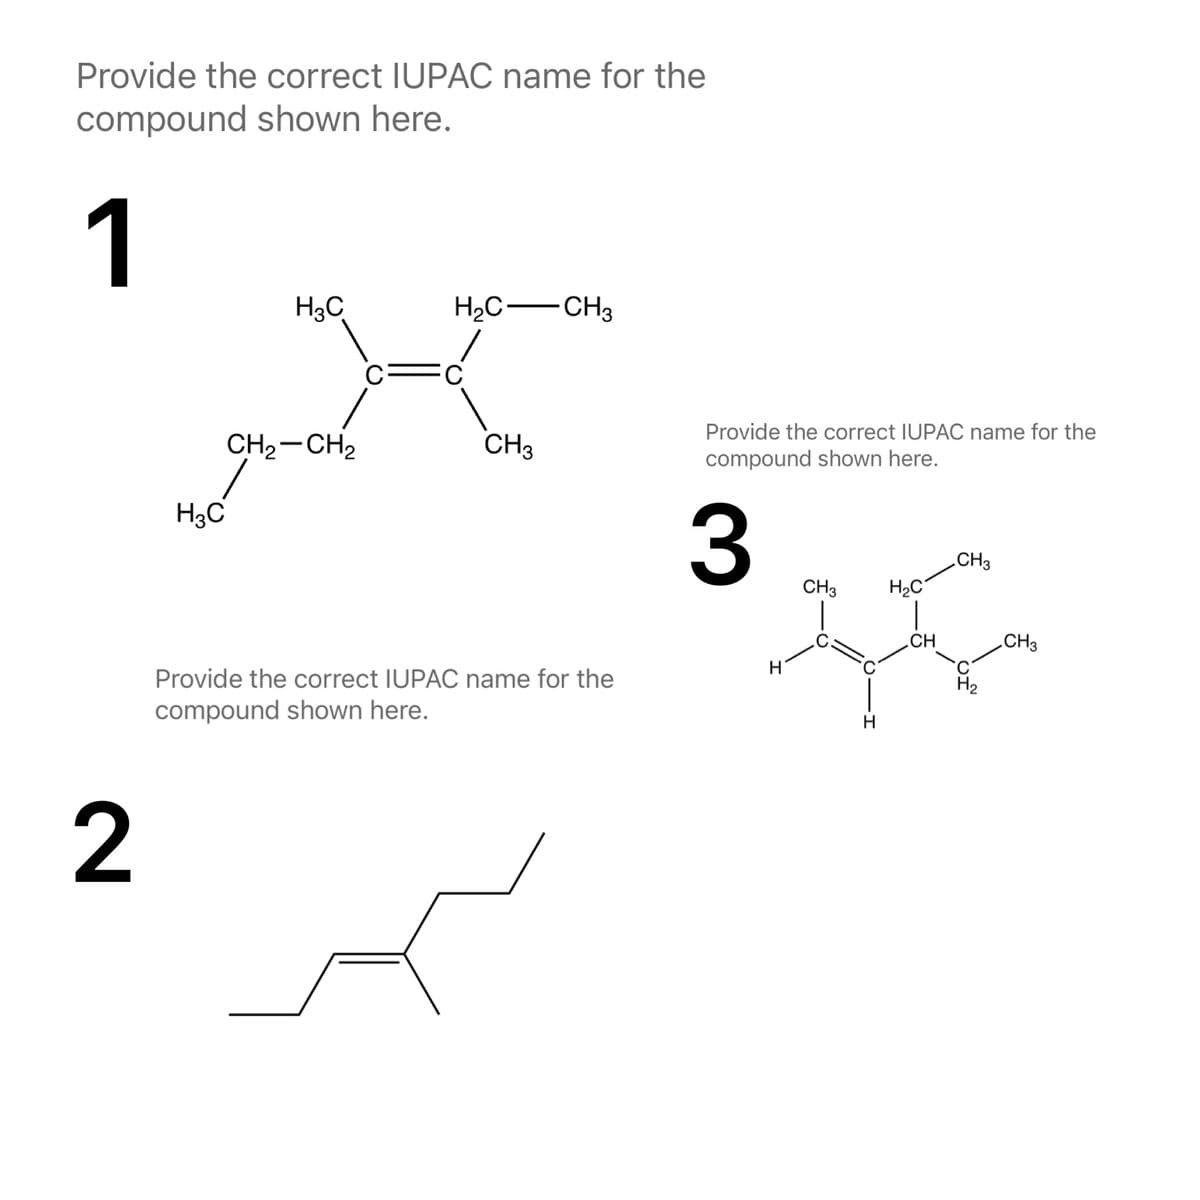 Provide the correct IUPAC name for the
compound shown here.
1
H3C
H2C-CH3
C
Provide the correct IUPAC name for the
CH2-CH2
CH3
compound shown here.
H3C
3
„CH3
CH3
H2C
CH
CH3
Provide the correct IUPAC name for the
compound shown here.
2
